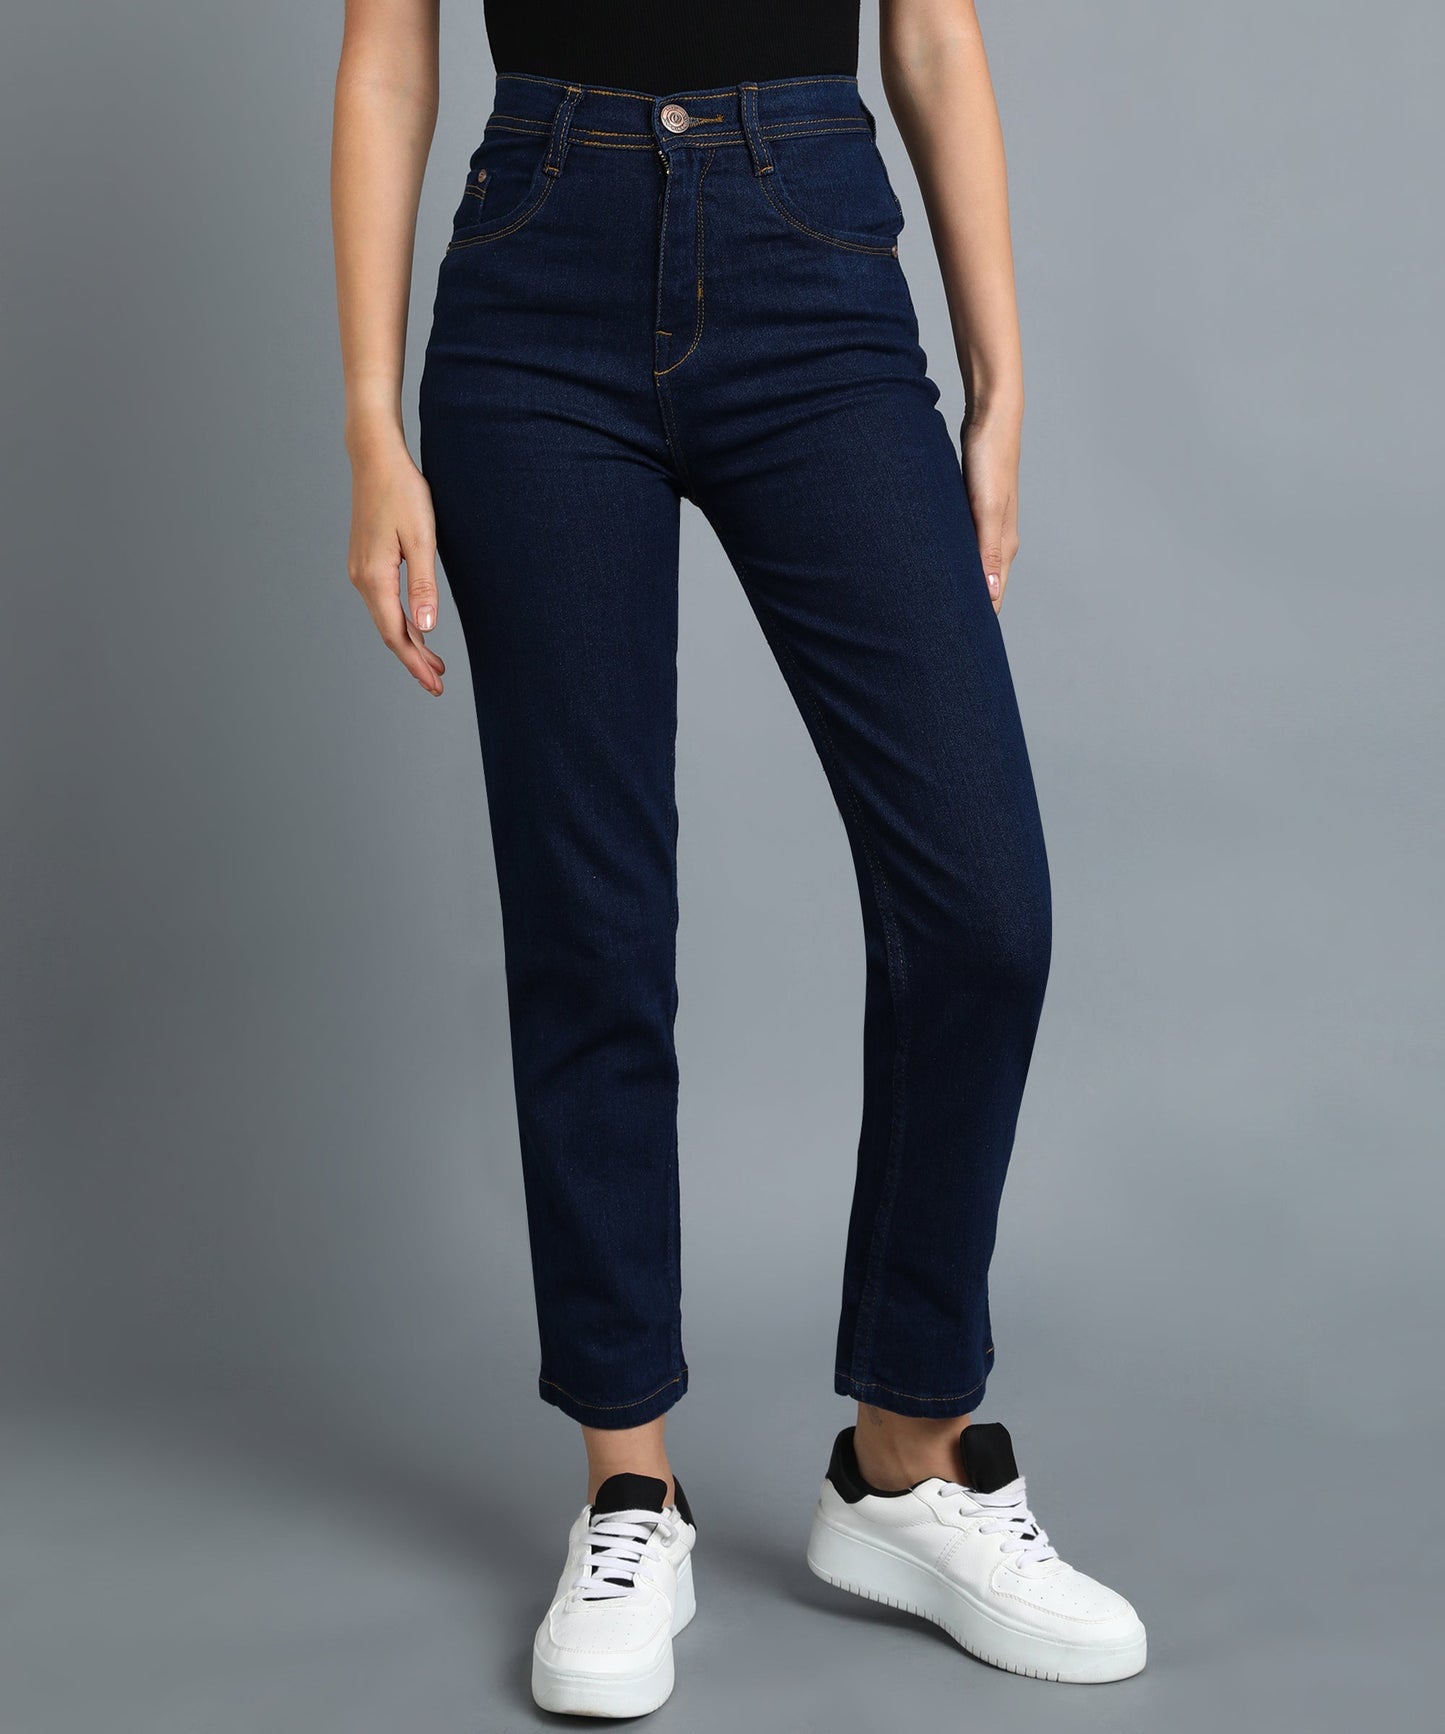 Basic Blue straight fit 5- pocket high rise jeans, clean look, zip fly with button closure, waistband with belt loops